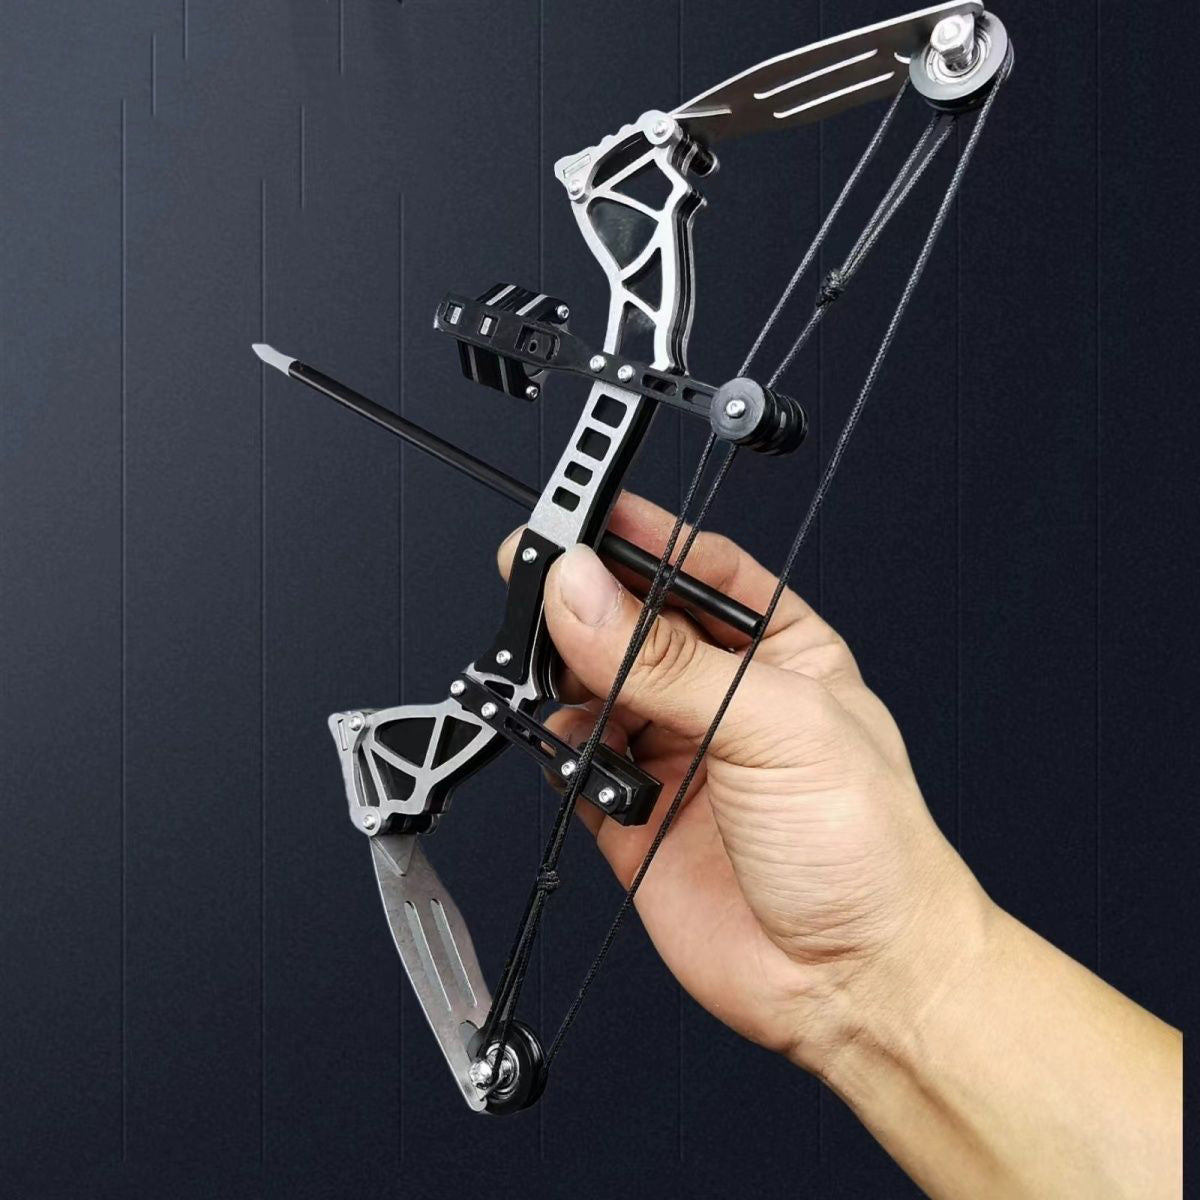 Compound Bow Training Shooting High Power Bow and Arrow